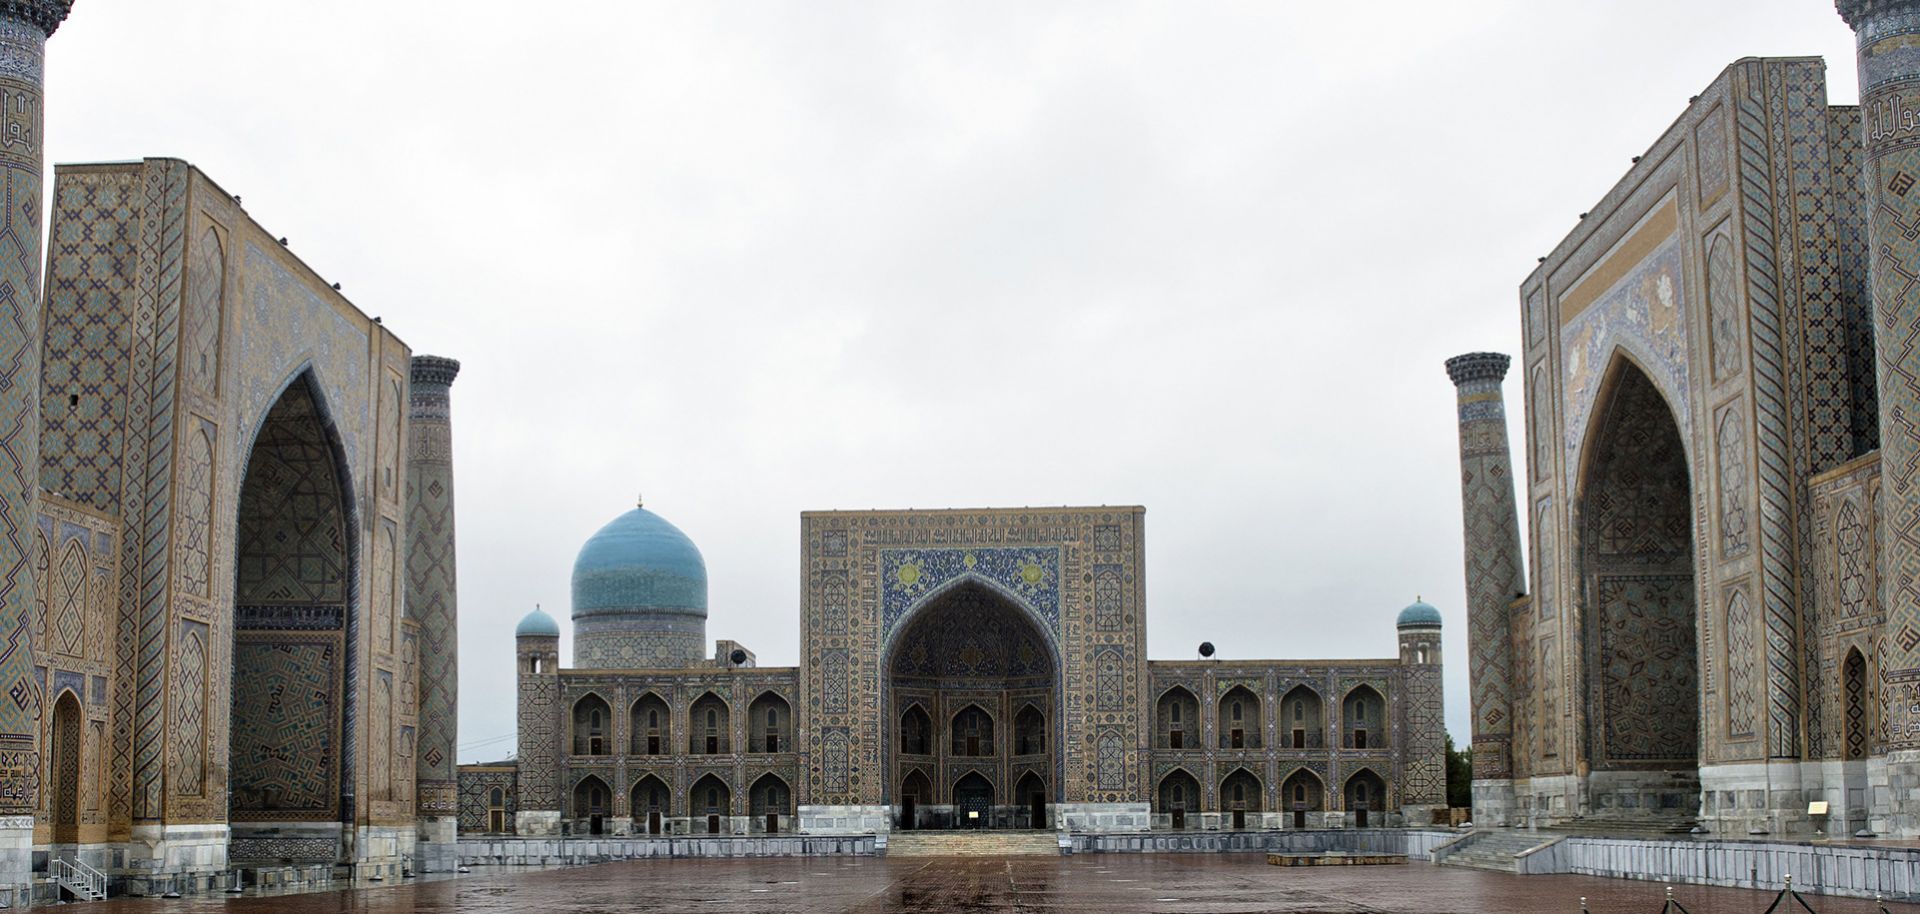 A view of the Register in Samarkand. Uzbekistan's clans are constantly jockeying for power, sometimes violently, in preparation for the succession.